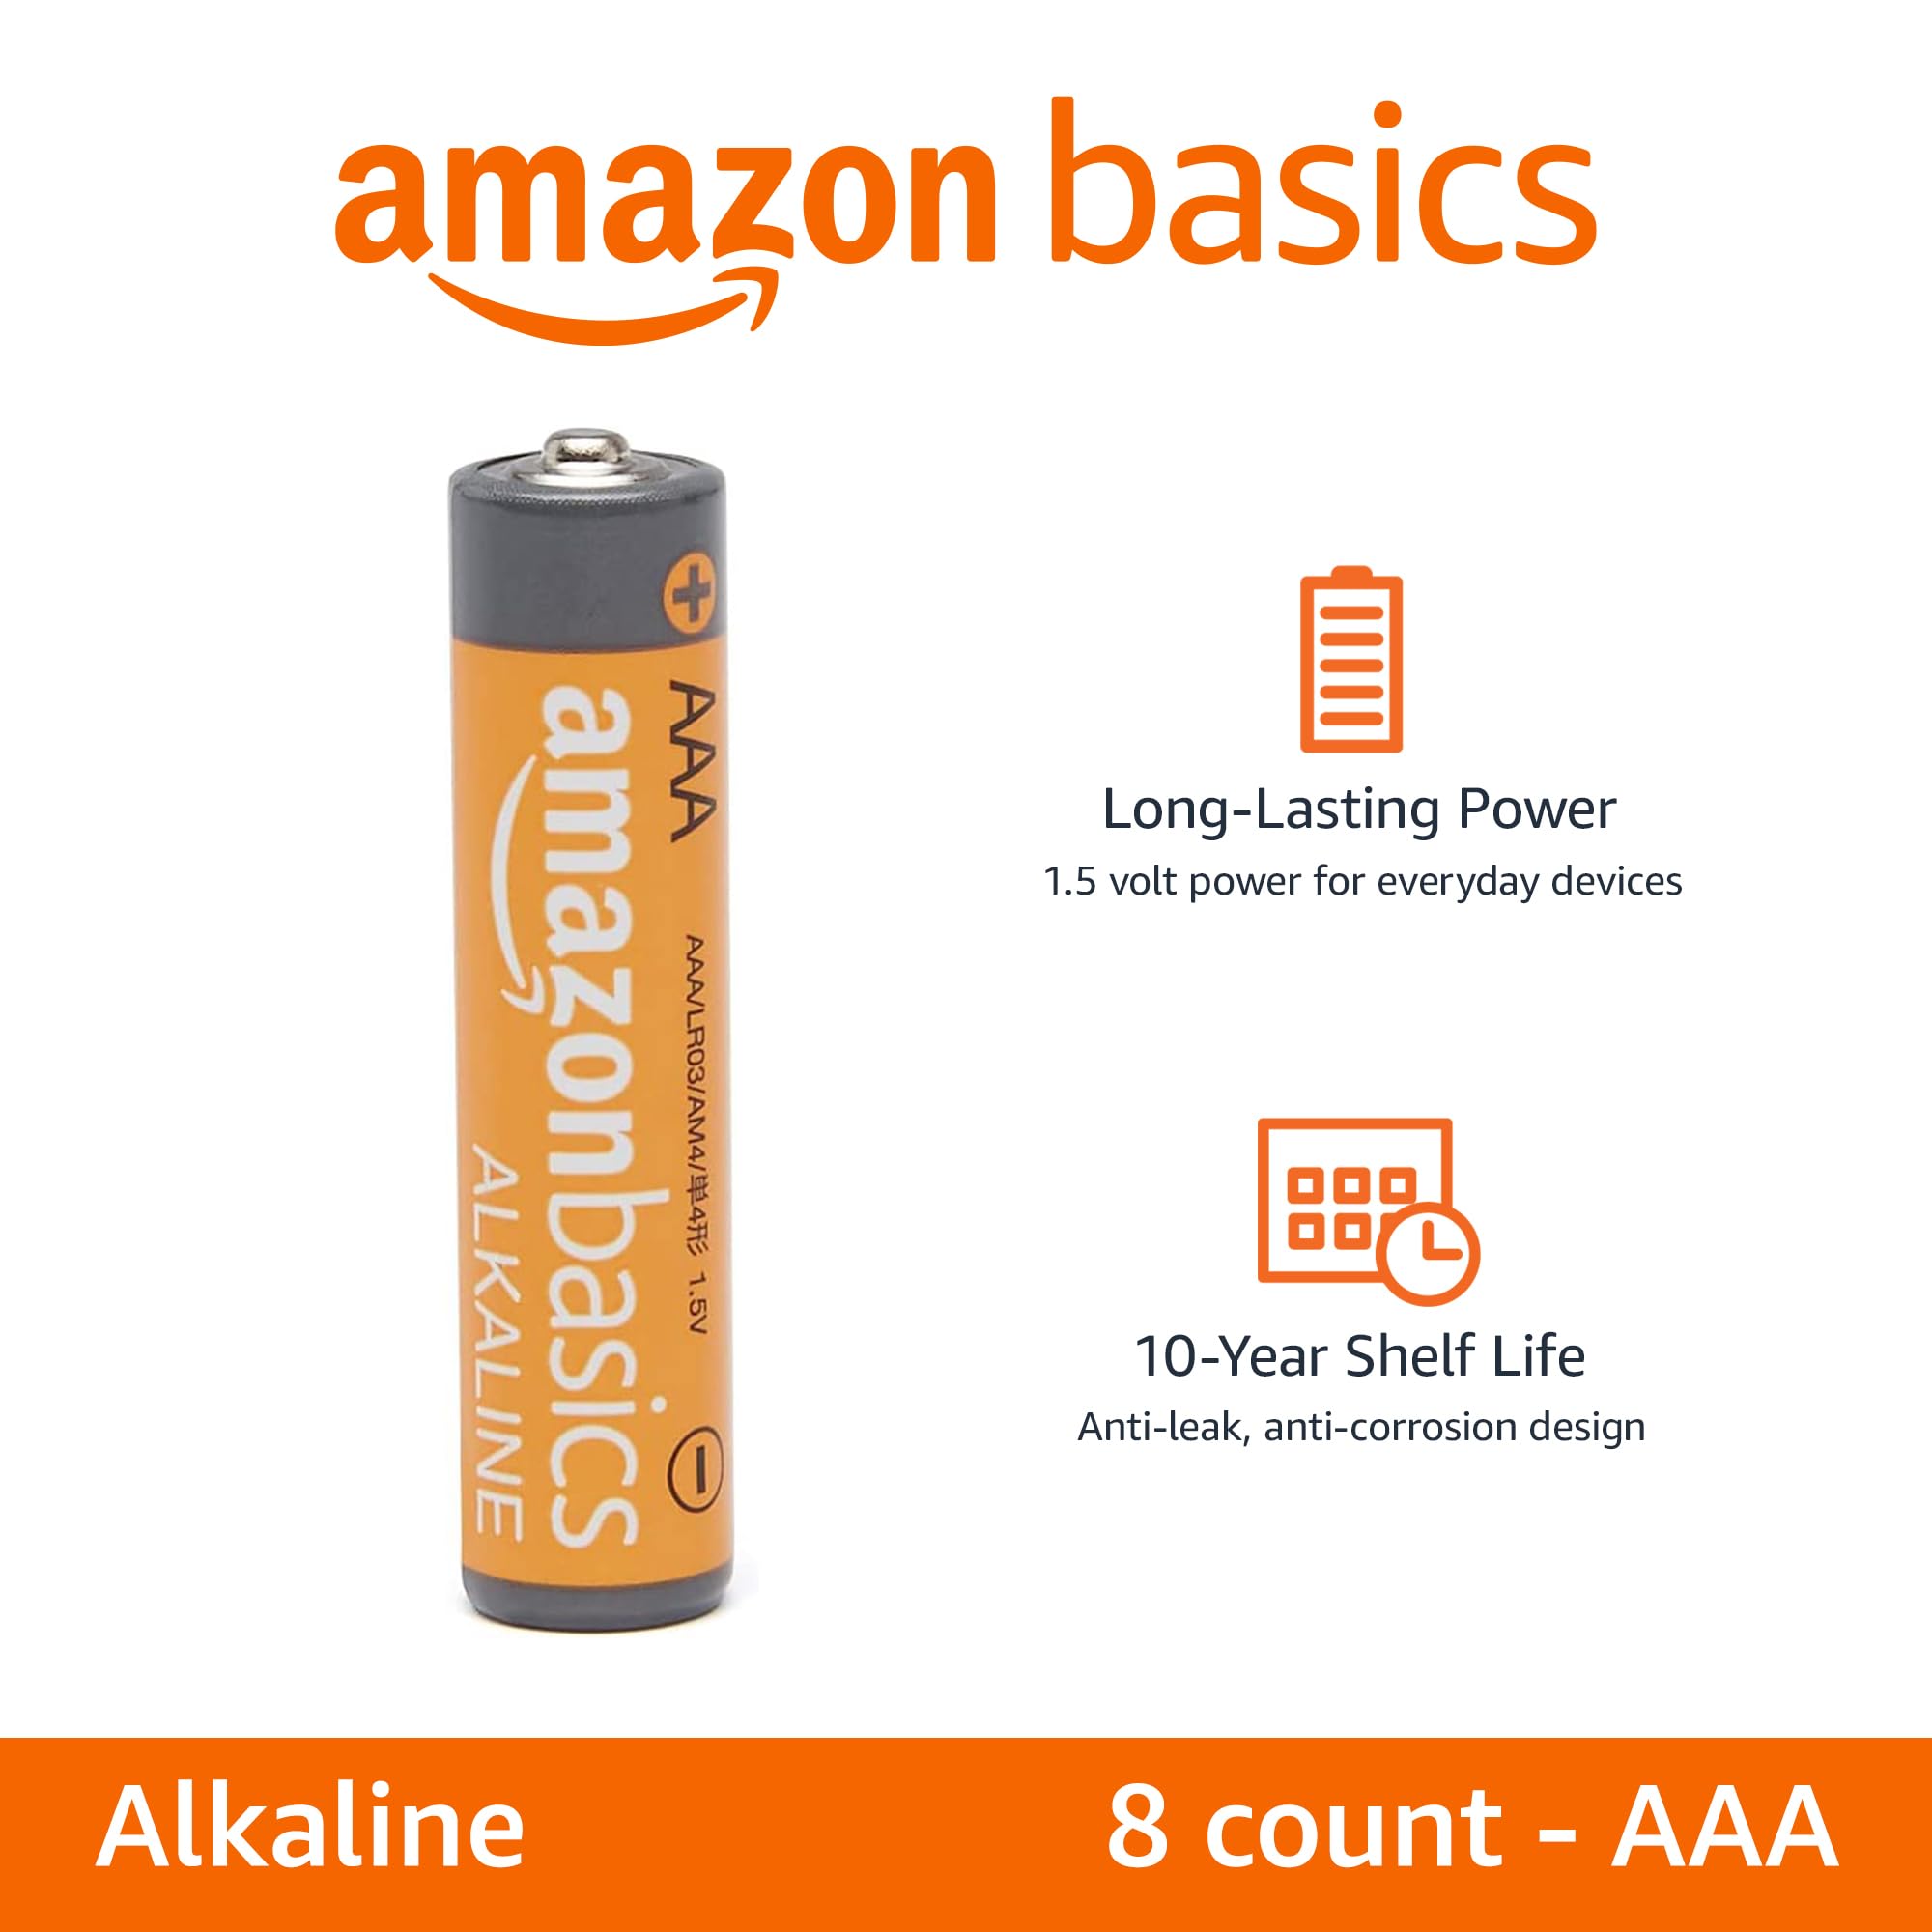 Amazon Basics 8 Pack AAA High-Performance Alkaline Batteries, 10-Year Shelf Life, Easy to Open Value Pack,8 Count (Pack of 1)